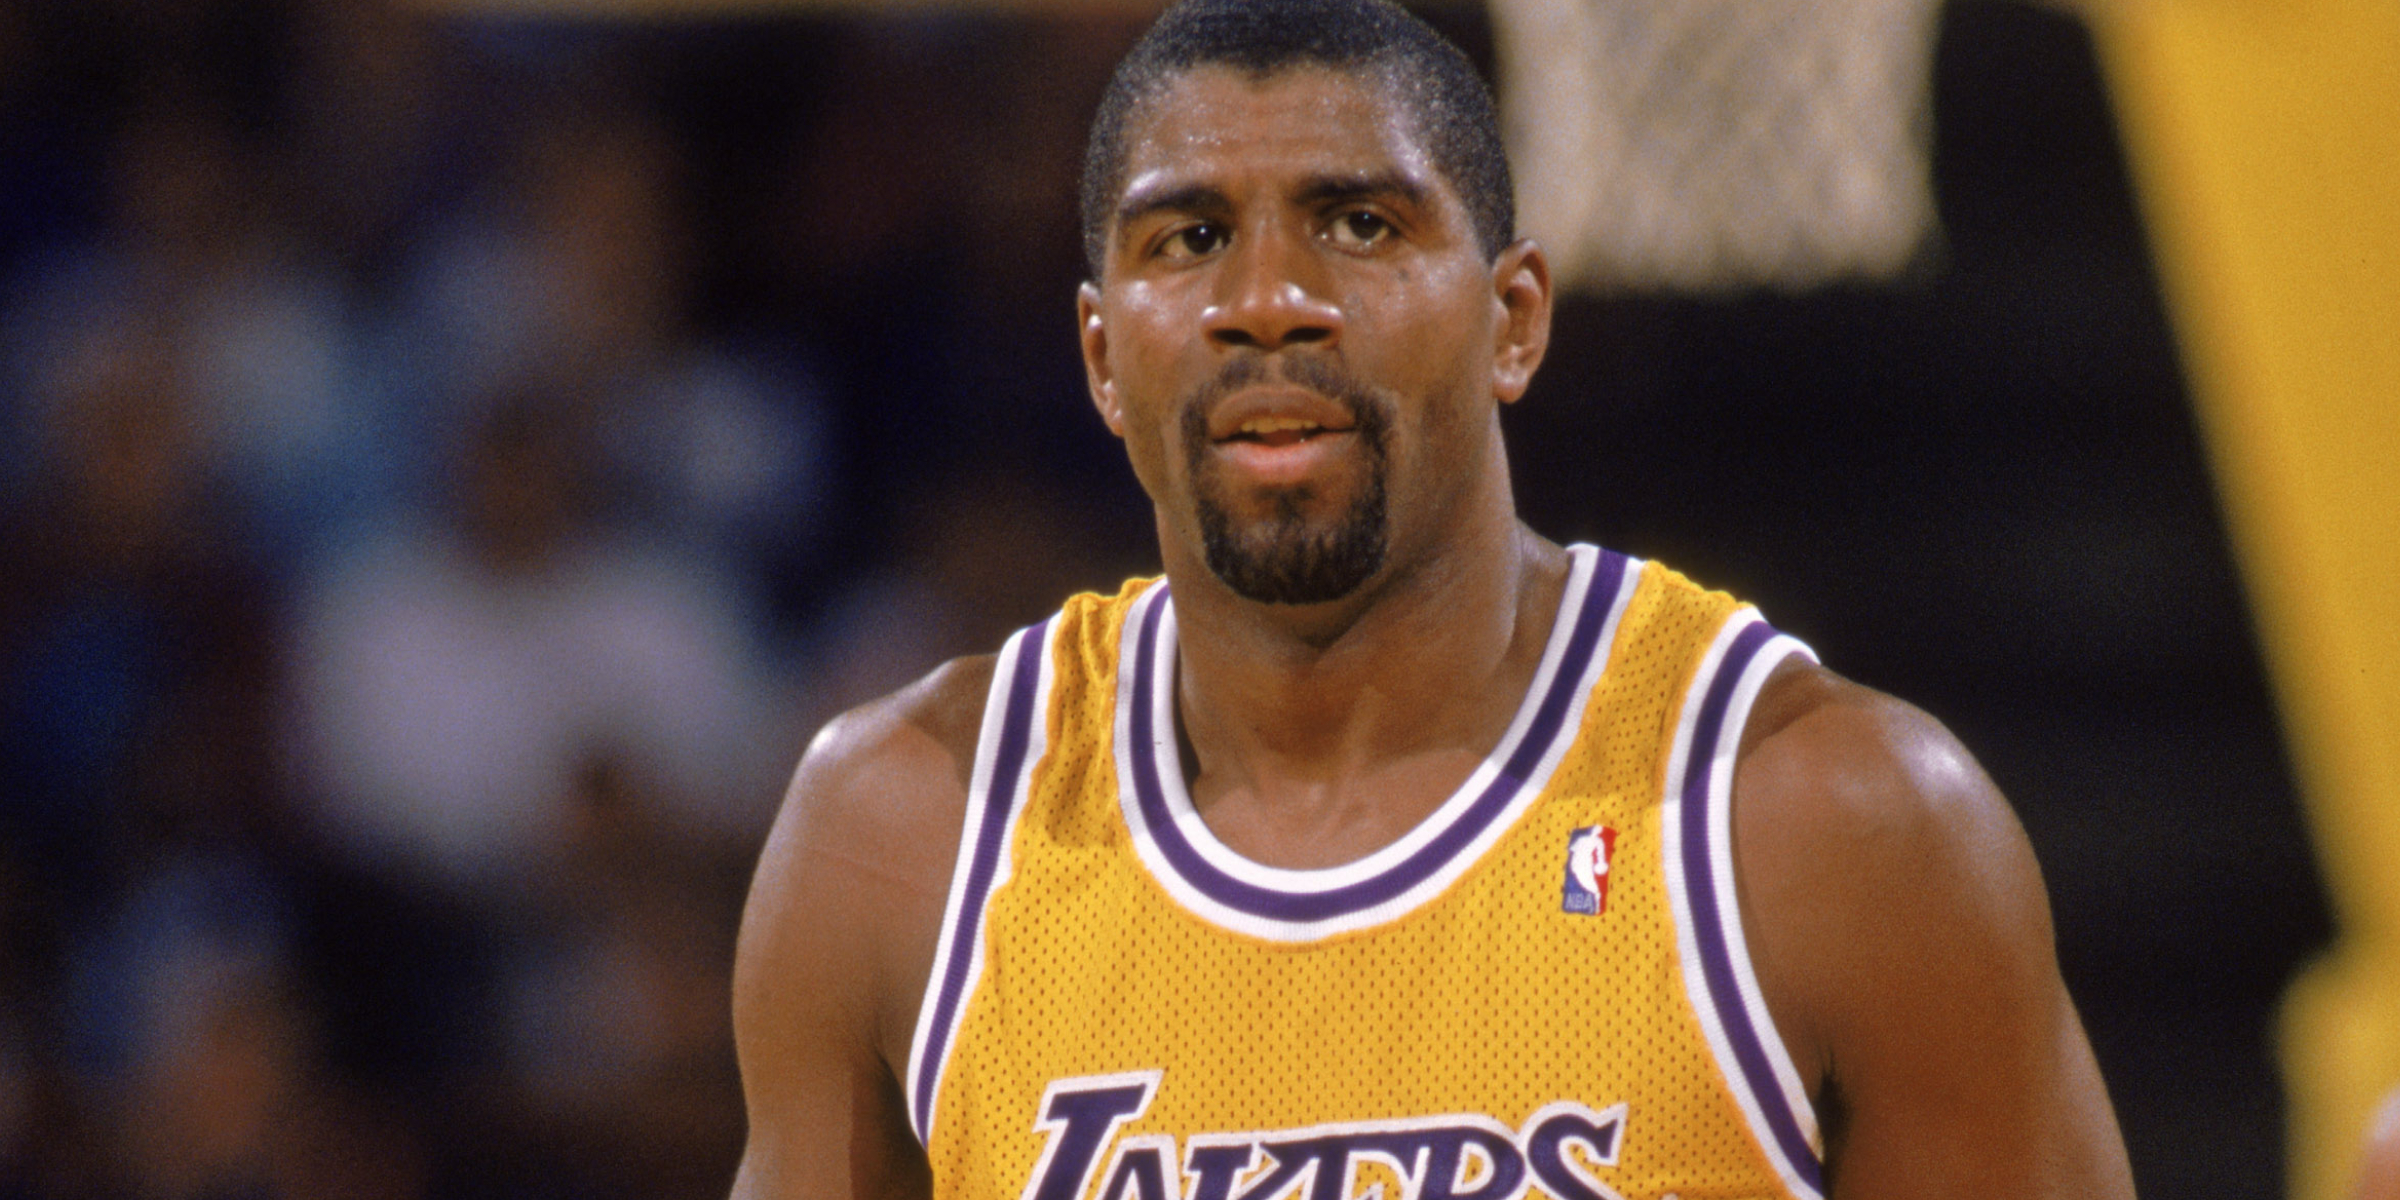 Magic Johnson | Source: Getty Images